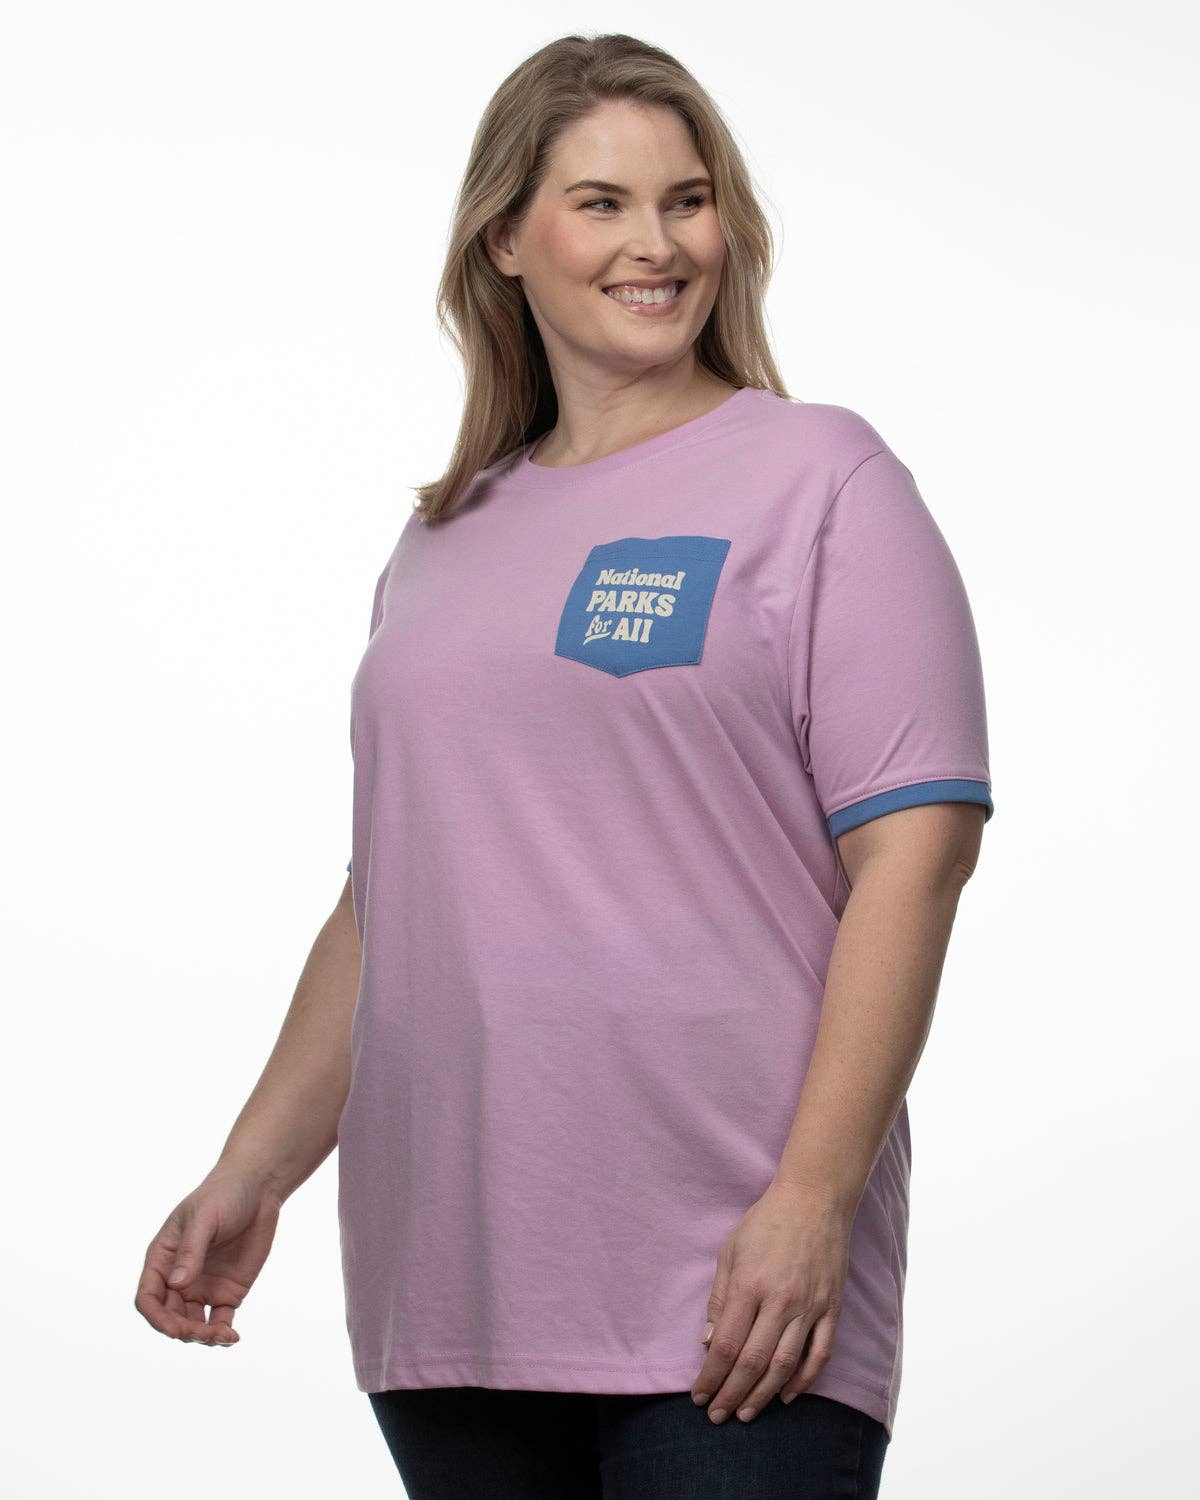 National Parks for All Pocket Tee - Pink